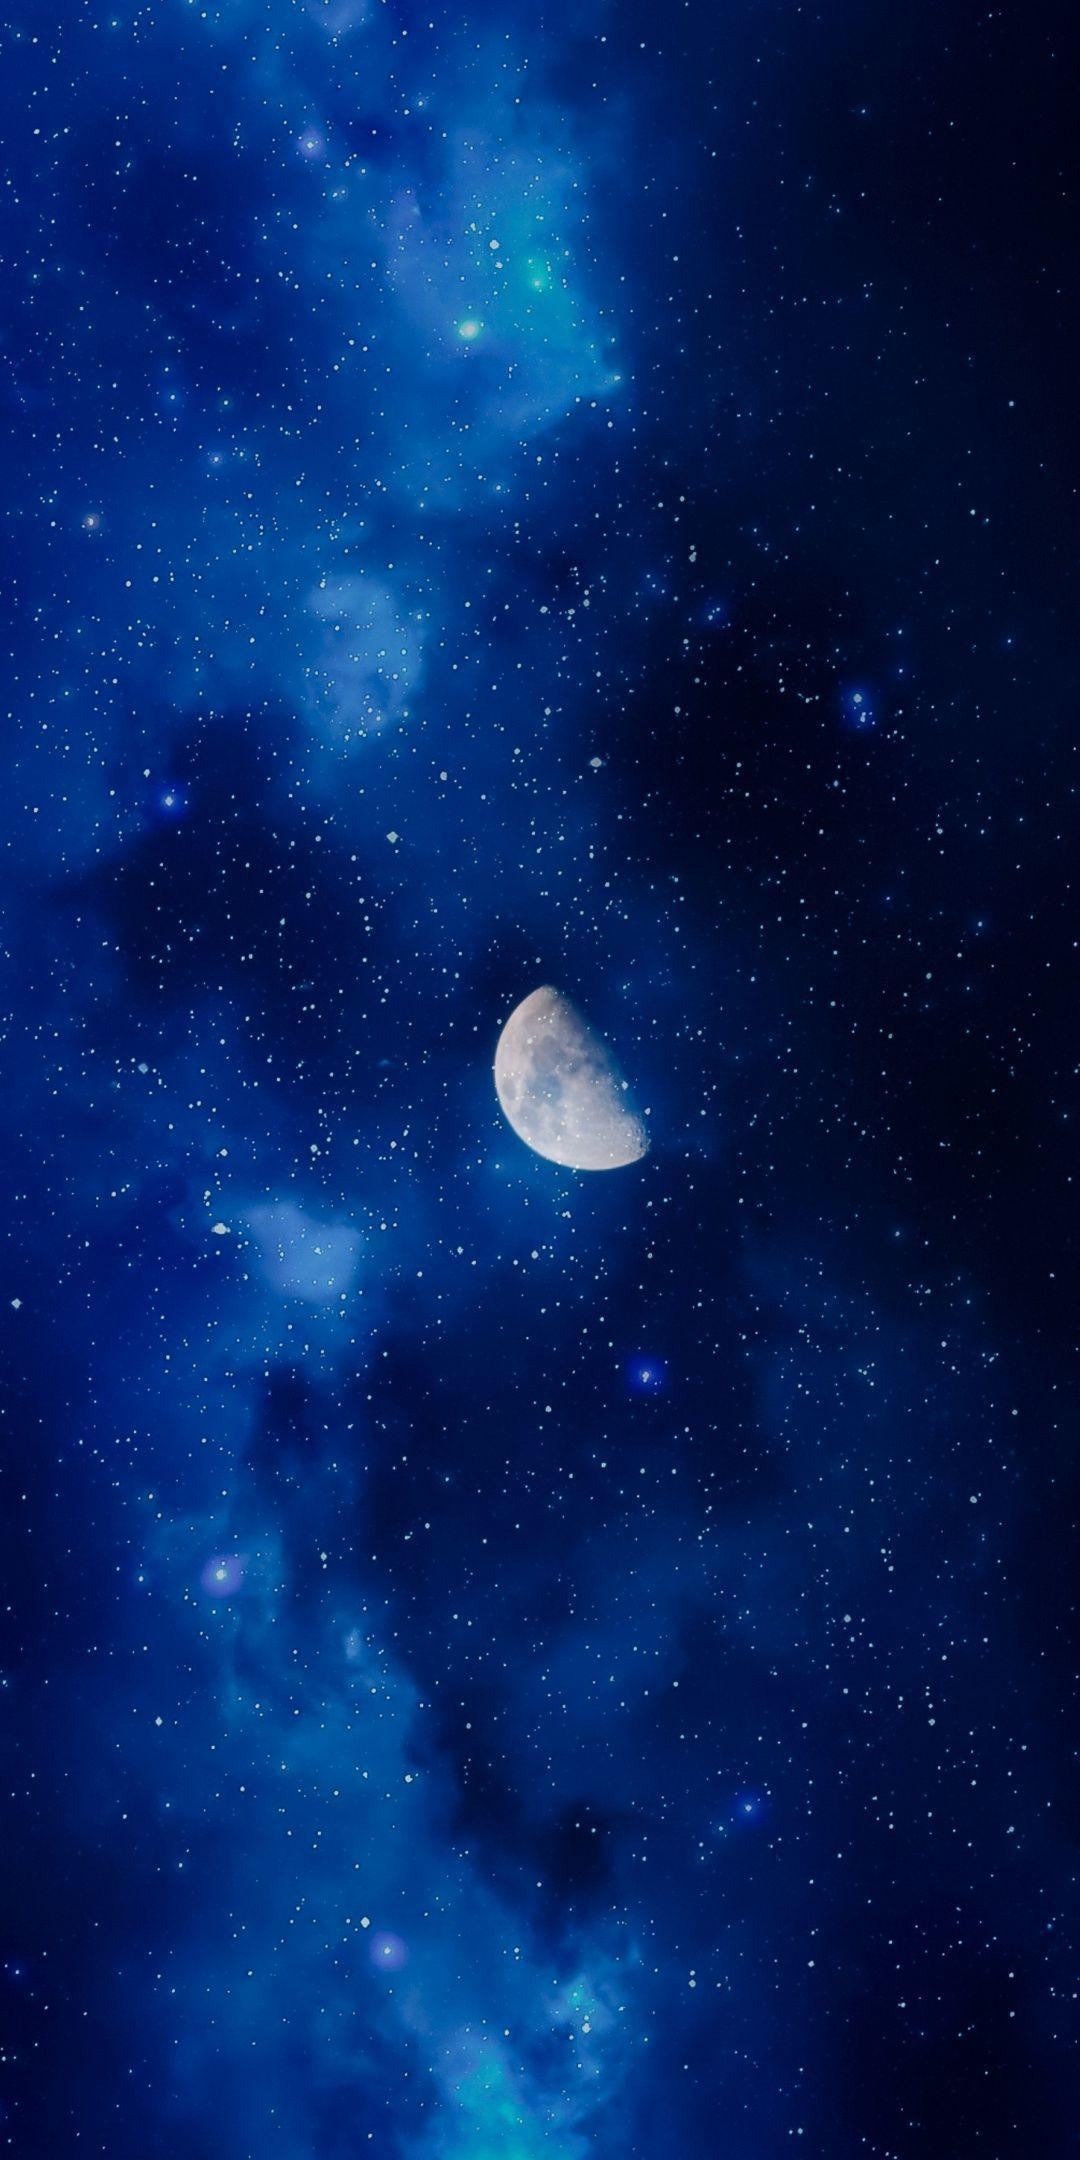 Cute Moon Galaxy Wallpapers - Top Free Cute Moon Galaxy Backgrounds ...